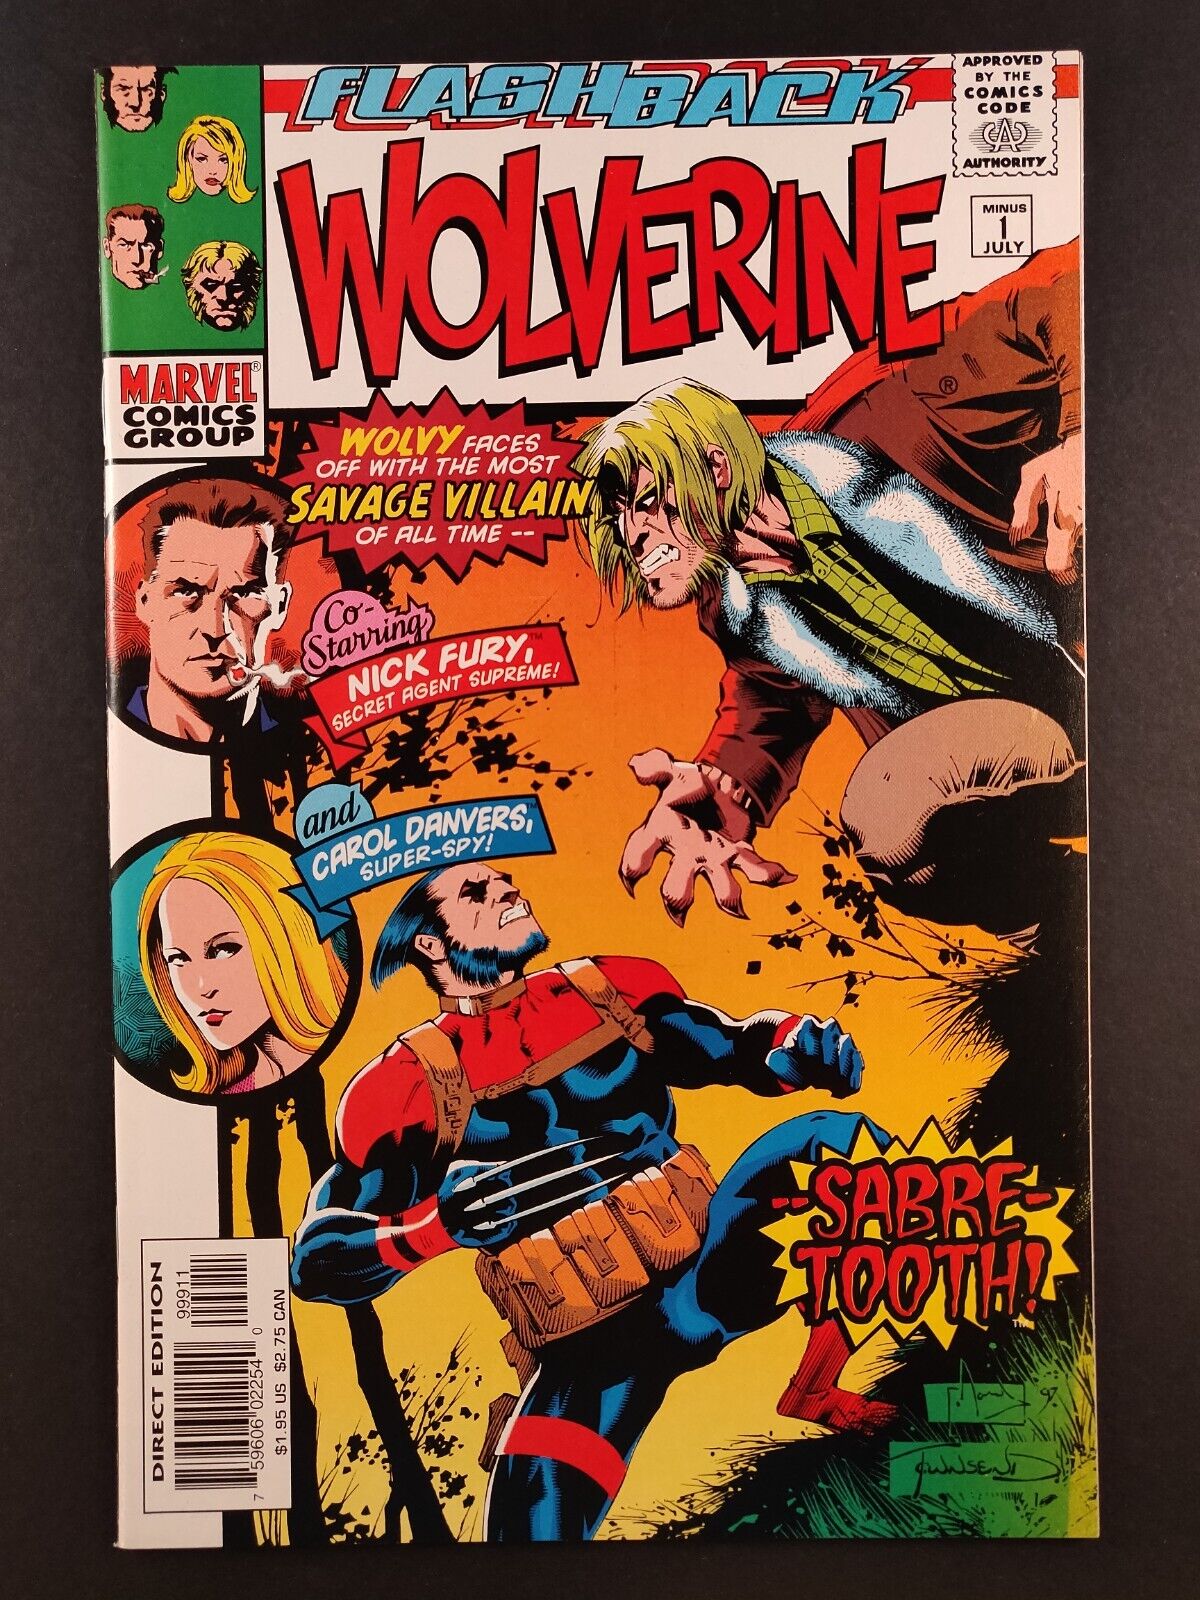 WOLVERINE (Marvel Vol 2 1988) You Pick ISSUE #-1 to 189 + Annual Finish Your Run